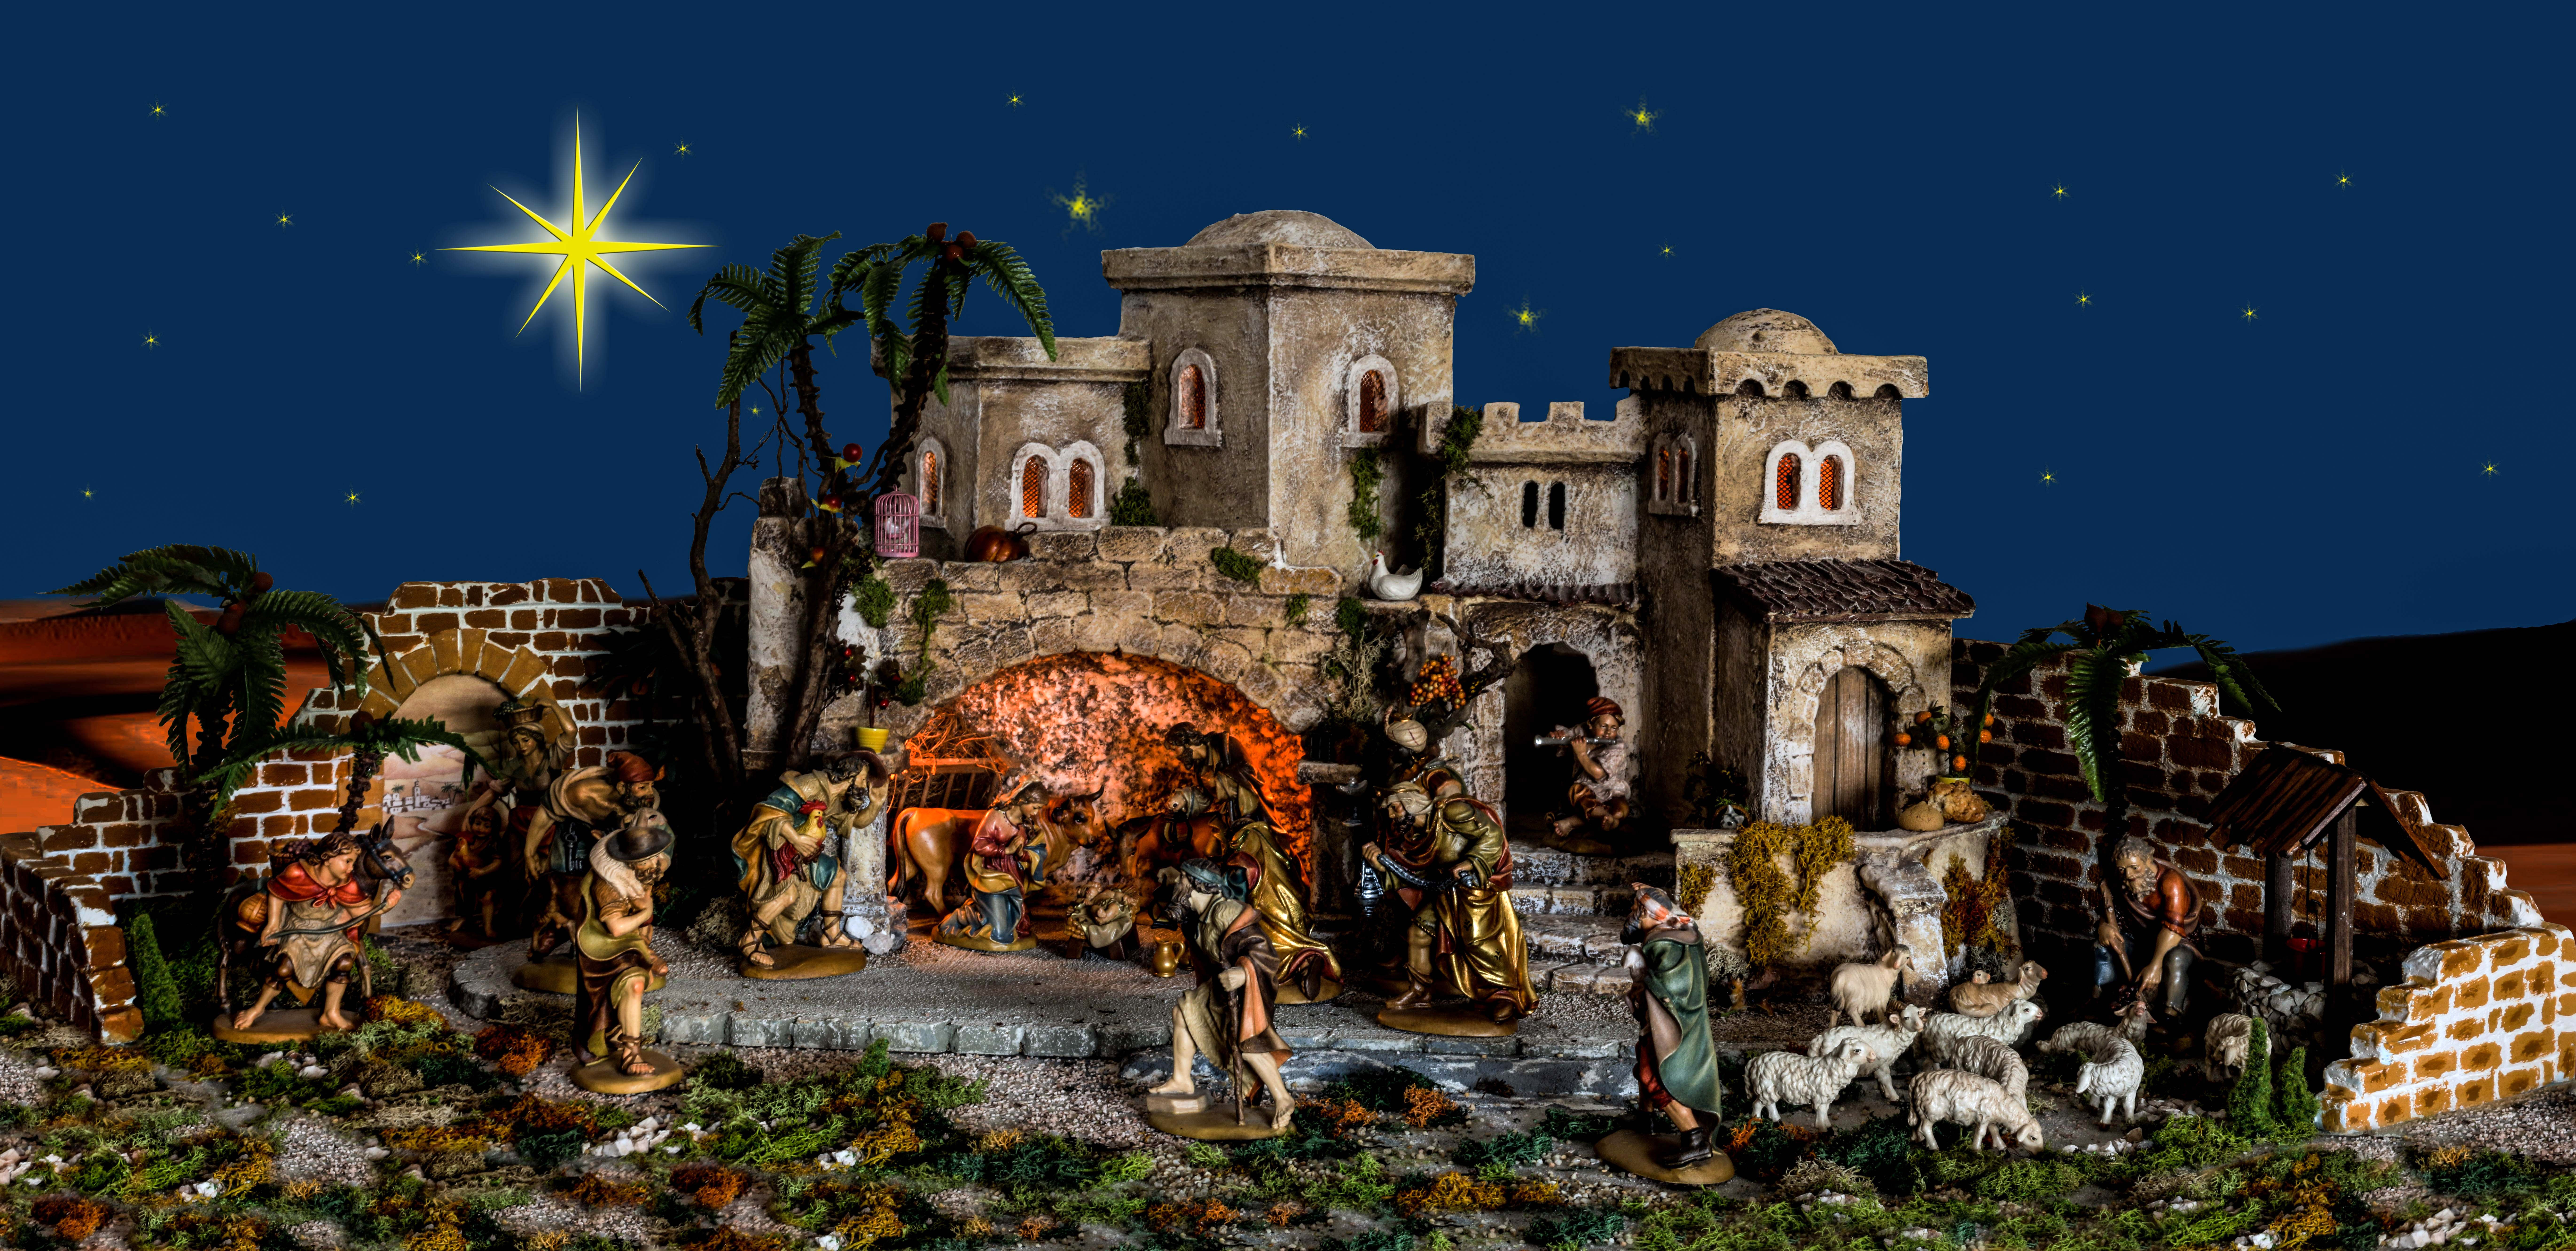 Christmas Decorations with Jesus in Manger image - Free stock photo - Public Domain photo - CC0 ...